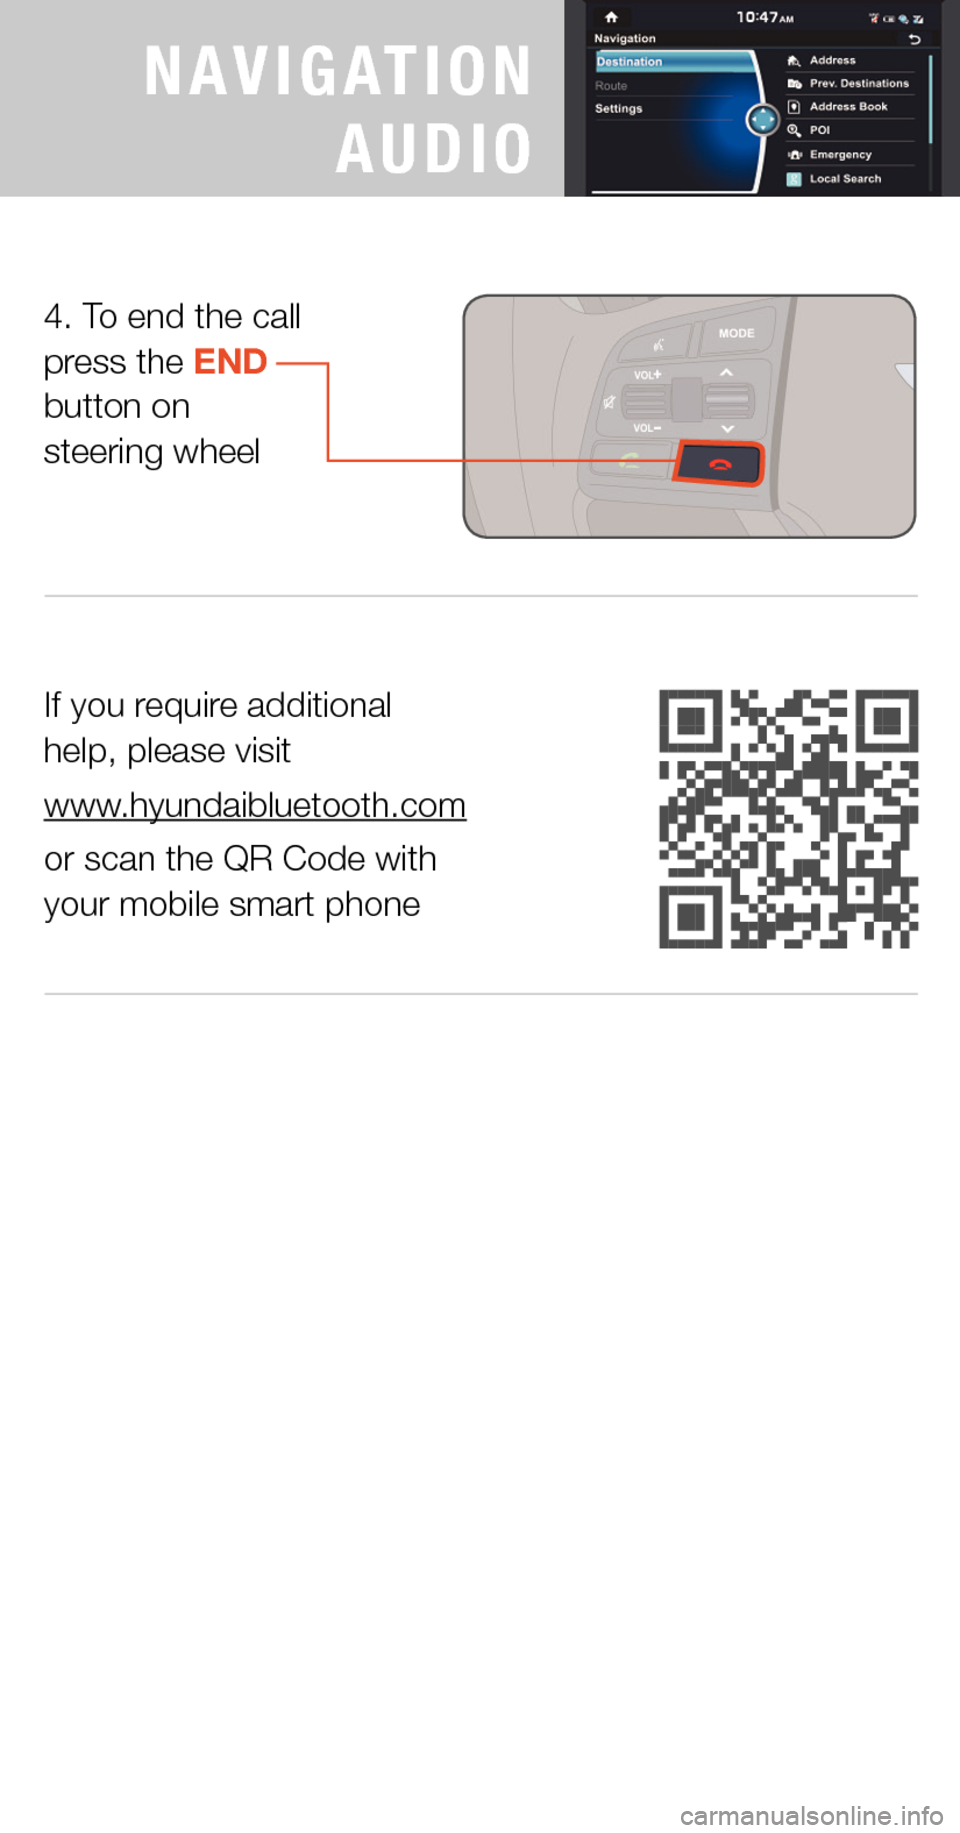 Hyundai Genesis 2015  Quick Tips If you require additional  help, please visit 
www.hyundaibluetooth.com
or scan the QR Code with  your mobile smart phone
4. To end the call press the END  button on  steering wheel
PREMIUM
NAVIGATION